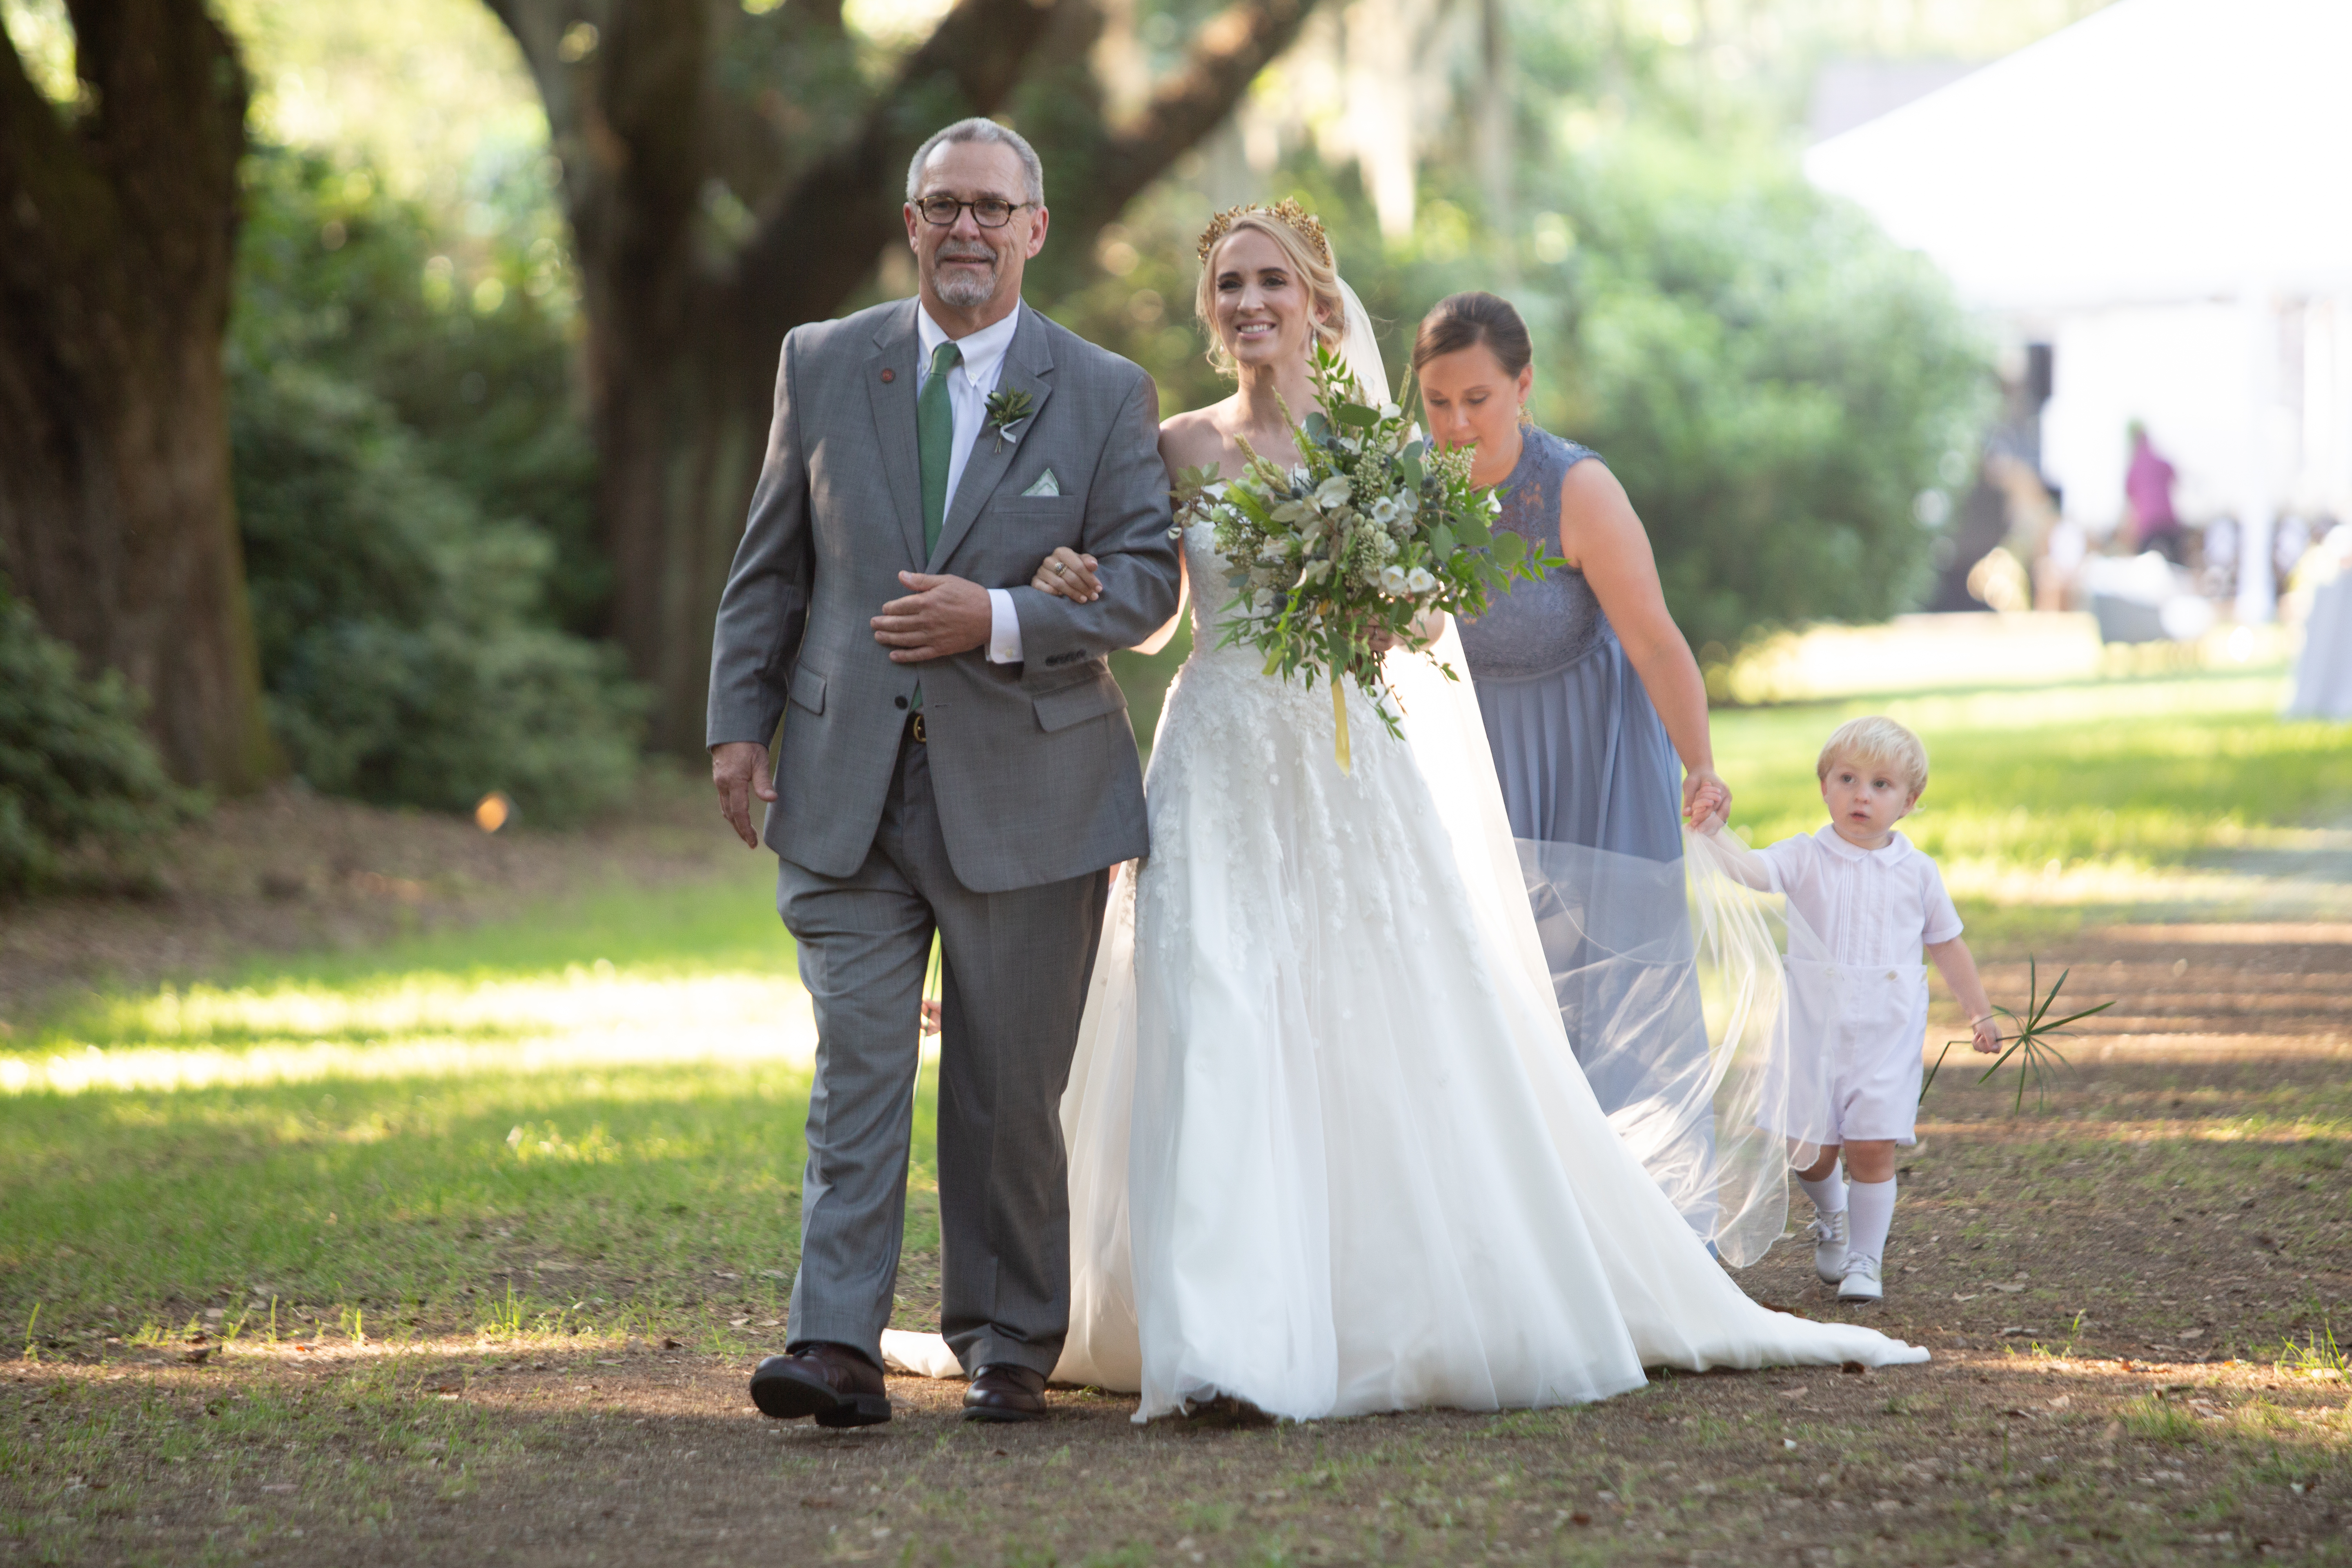 Lauren McFadden was escorted down the aisle by her father, Mac McFadden, while the bride’s sister, Mary Mac Wilson, attended to Lauren’s veil with the help of Lauren’s two nephews, Harry Wilson and Bennett McFadden. 